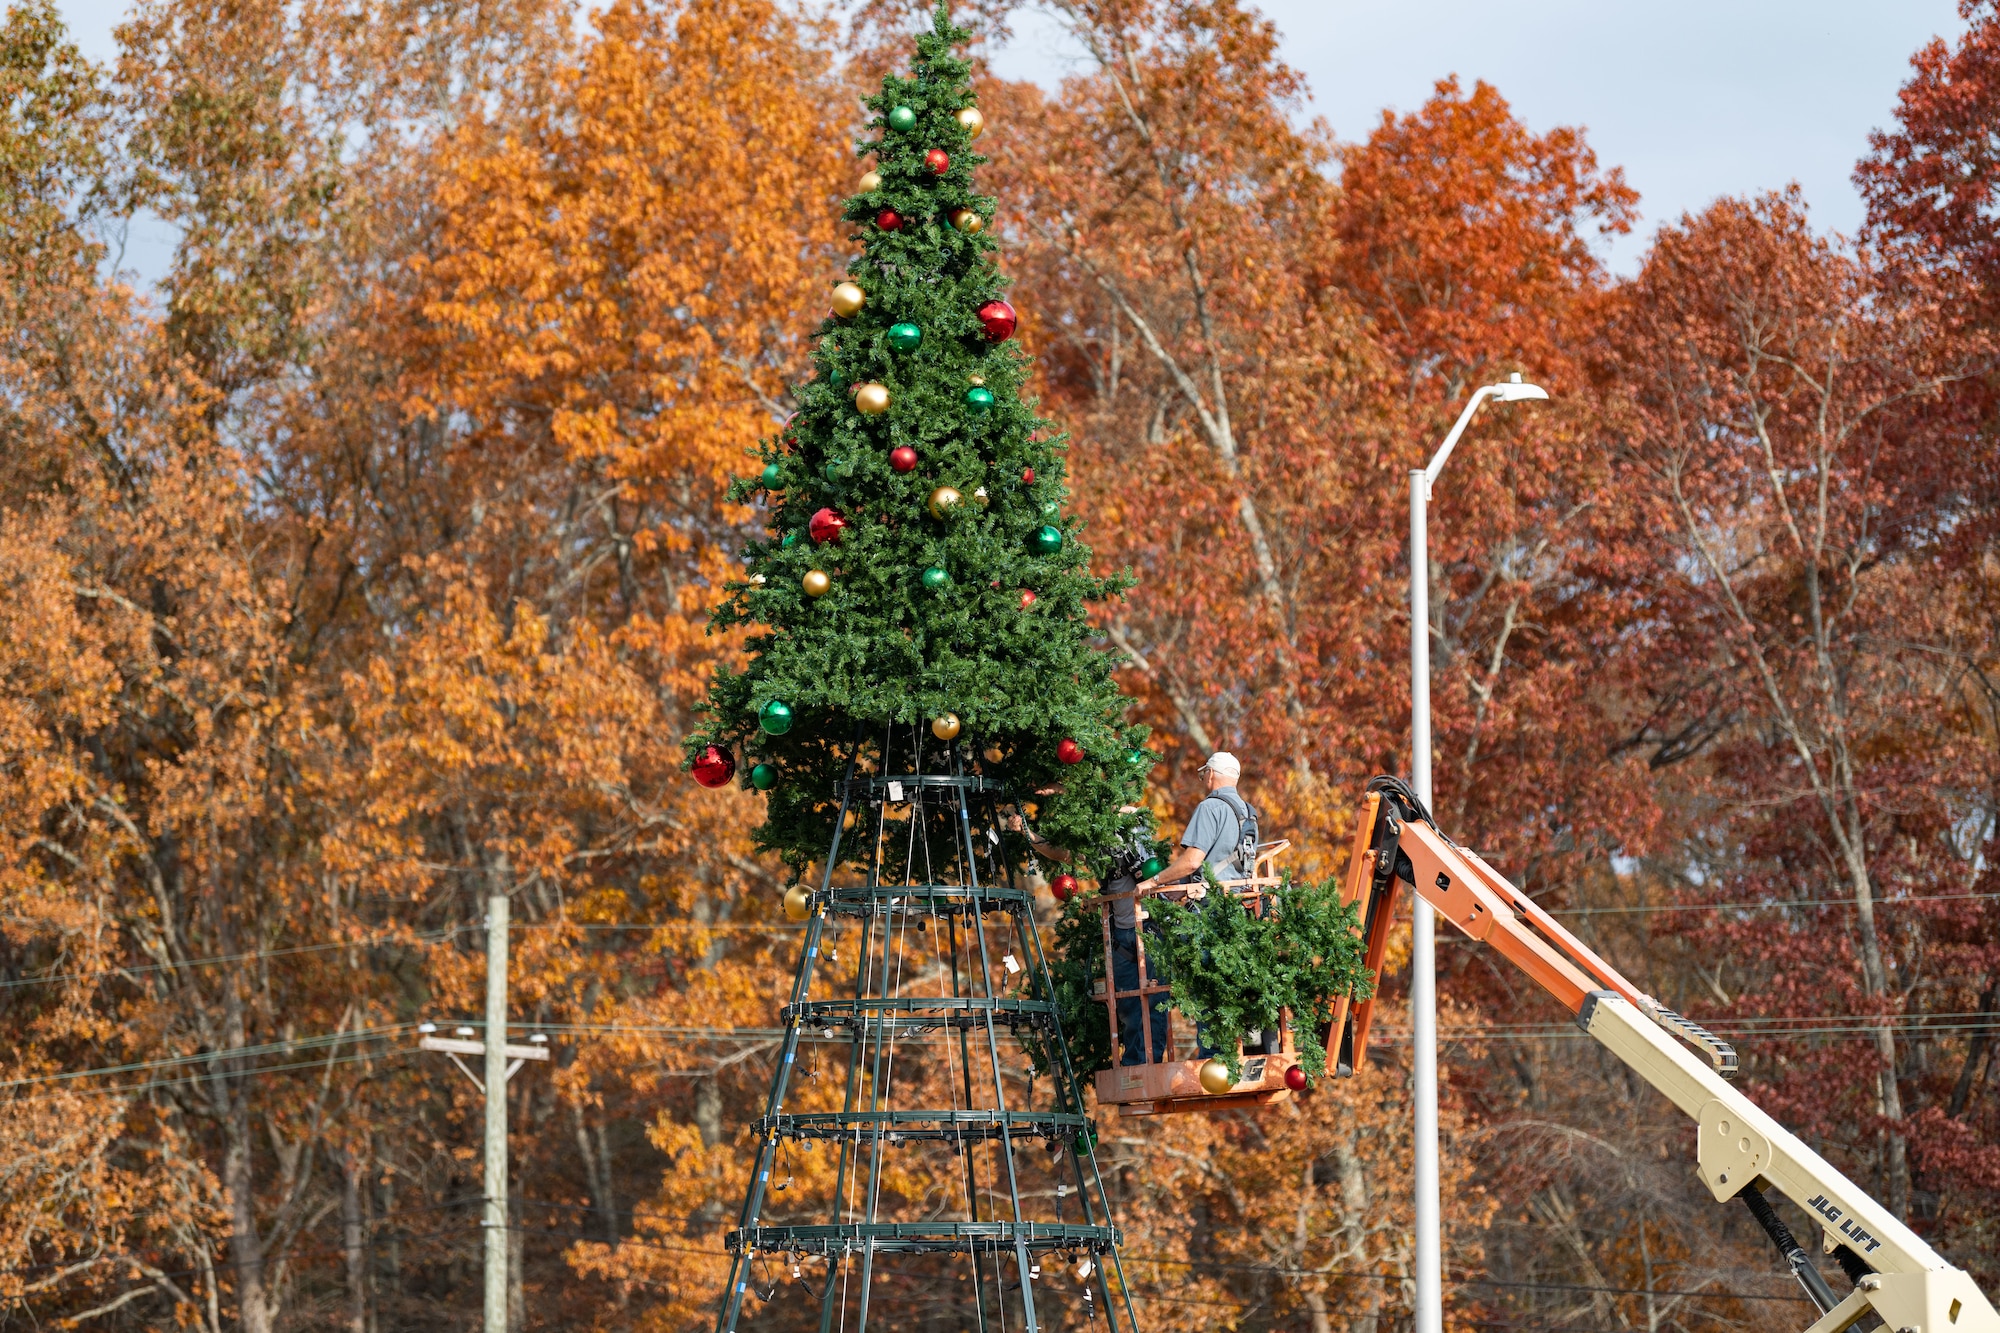 An Arnold Air Force Base team member helps assemble the large Christmas tree located just inside the Main Gate at Arnold AFB, Tenn, Nov. 9, 2023. A lighting ceremony for the 40-foot-tall, 22-foot-wide tree is scheduled for Dec. 4, 2023, at 4 p.m. (U.S. Air Force photo by Keith Thornburgh)